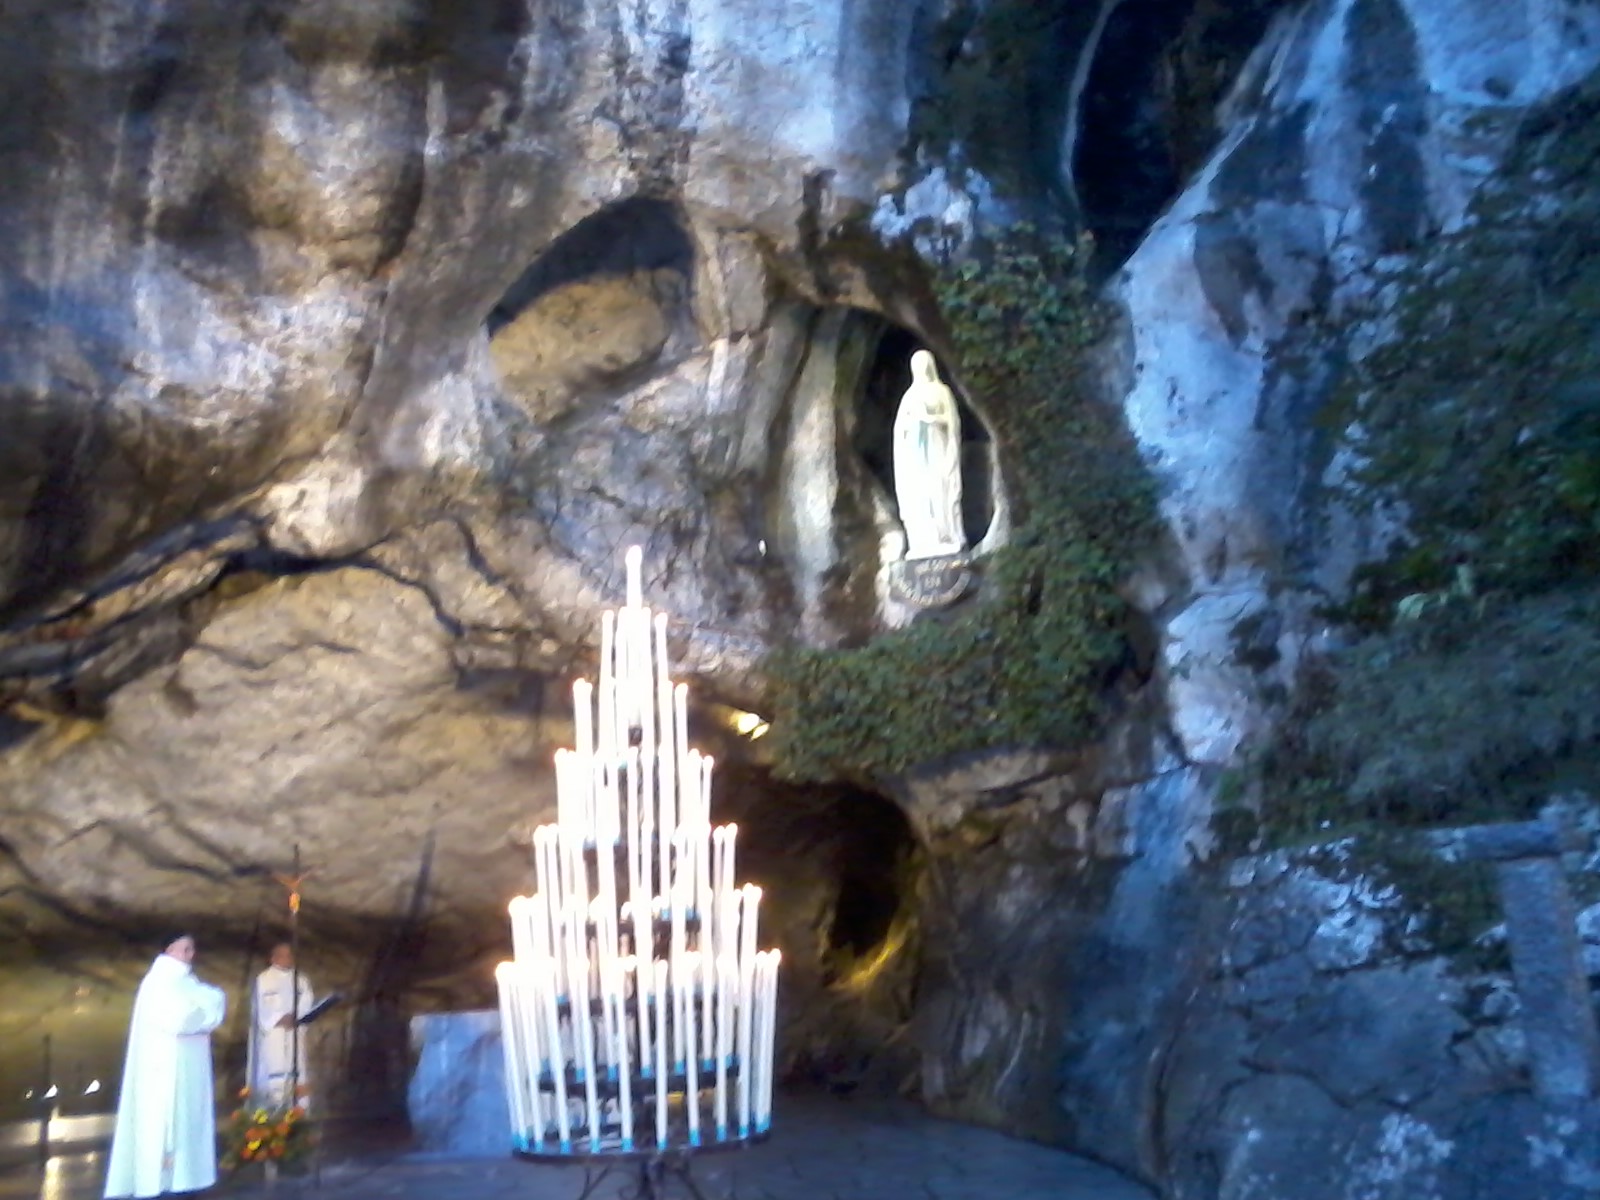 Return to Order On a Pilgrimage of Desolation and Growth at Lourdes 4